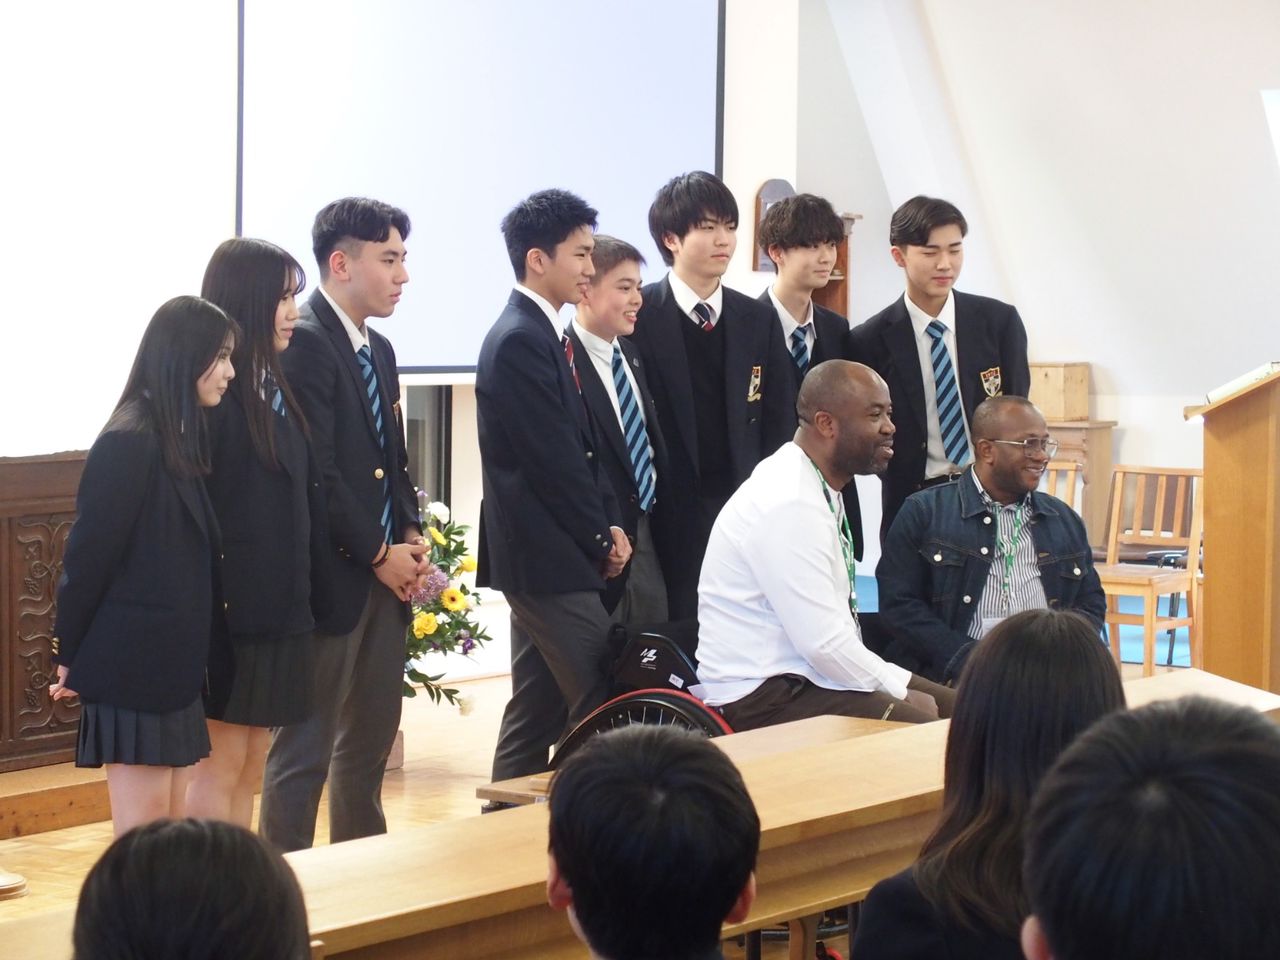 Japanese Students of RIKKYO School In England Donate Basketball Wheelchairs To LOC For Accra 2023 Paralympic Games